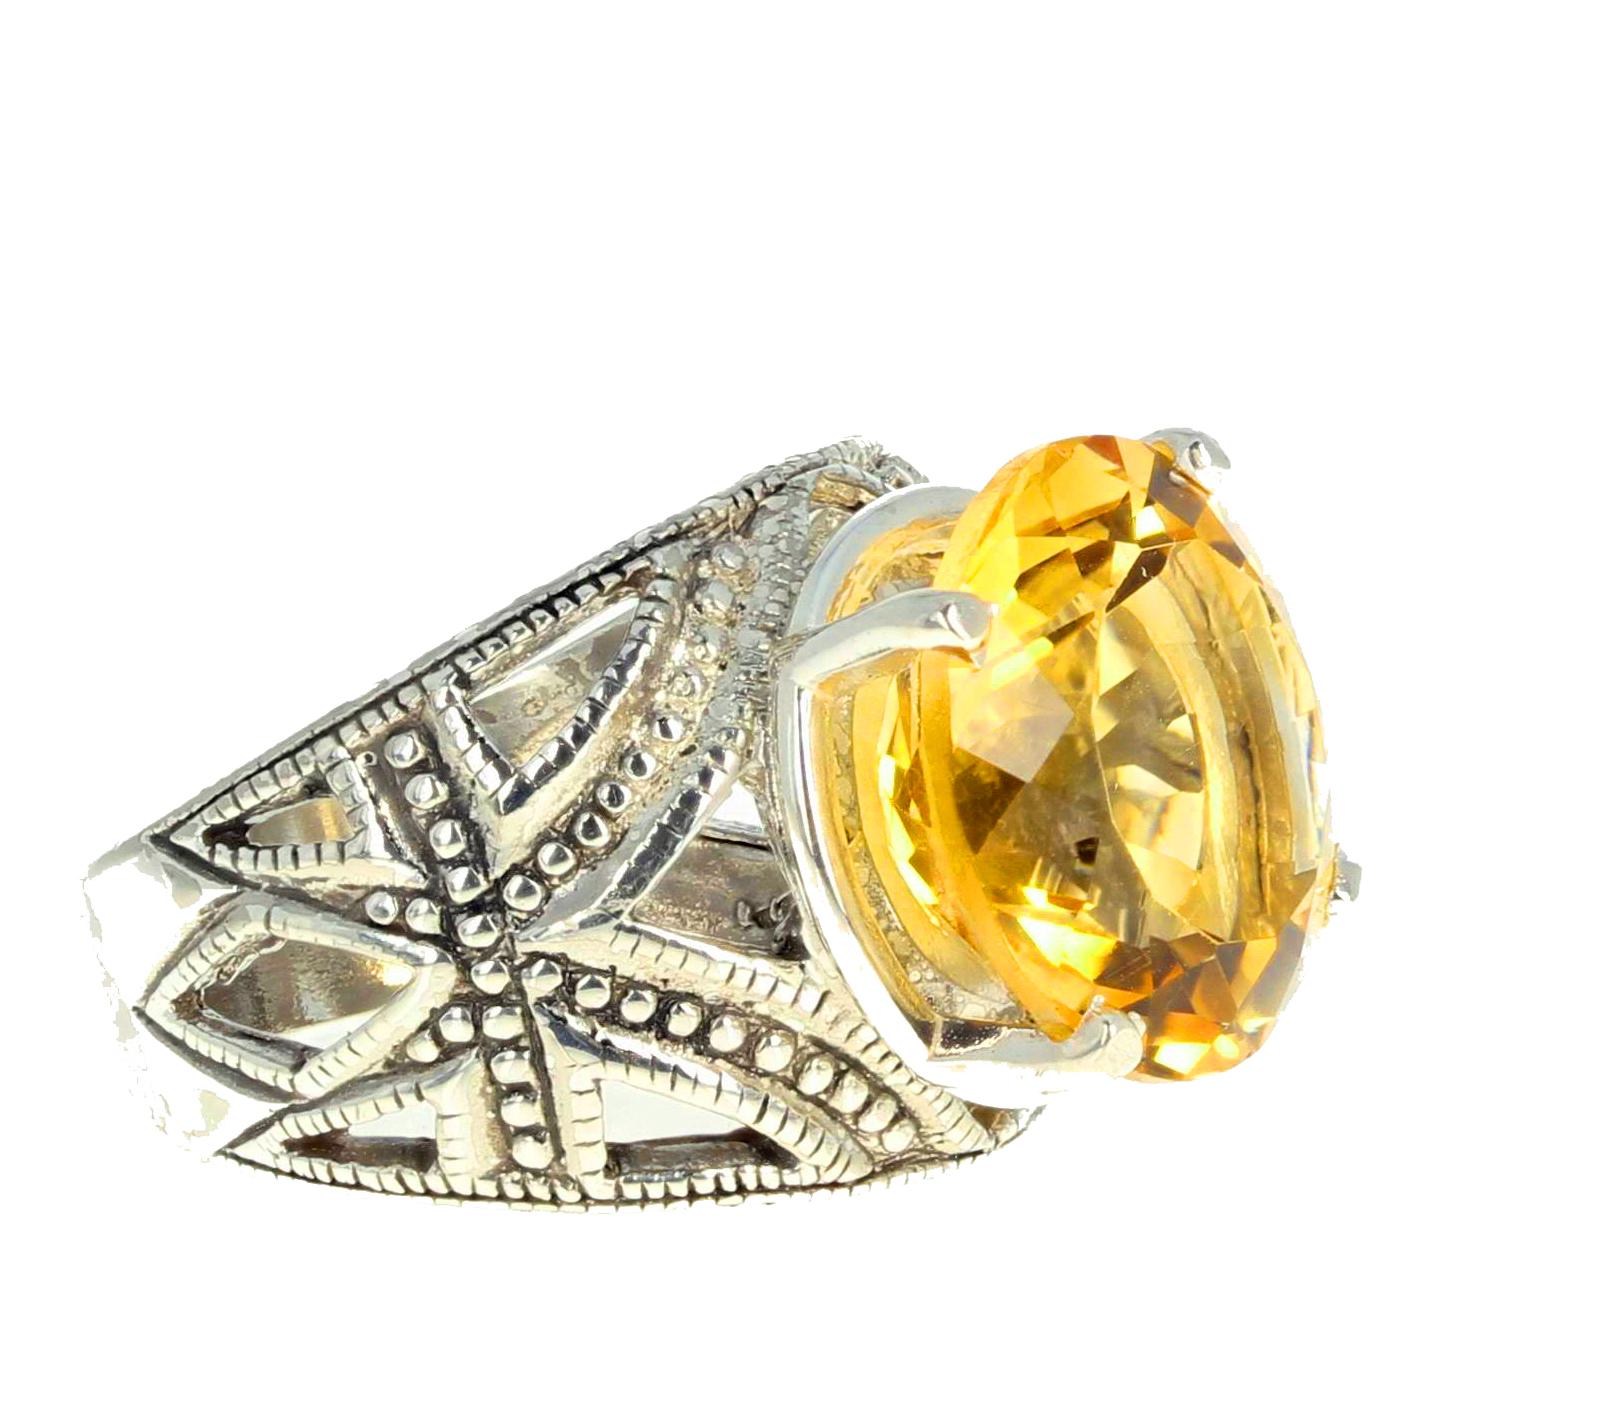 Round Cut AJD Glittering Brilliant GORGEOUS 9.1 Ct. Yellow Citrine Sterling Silver Ring